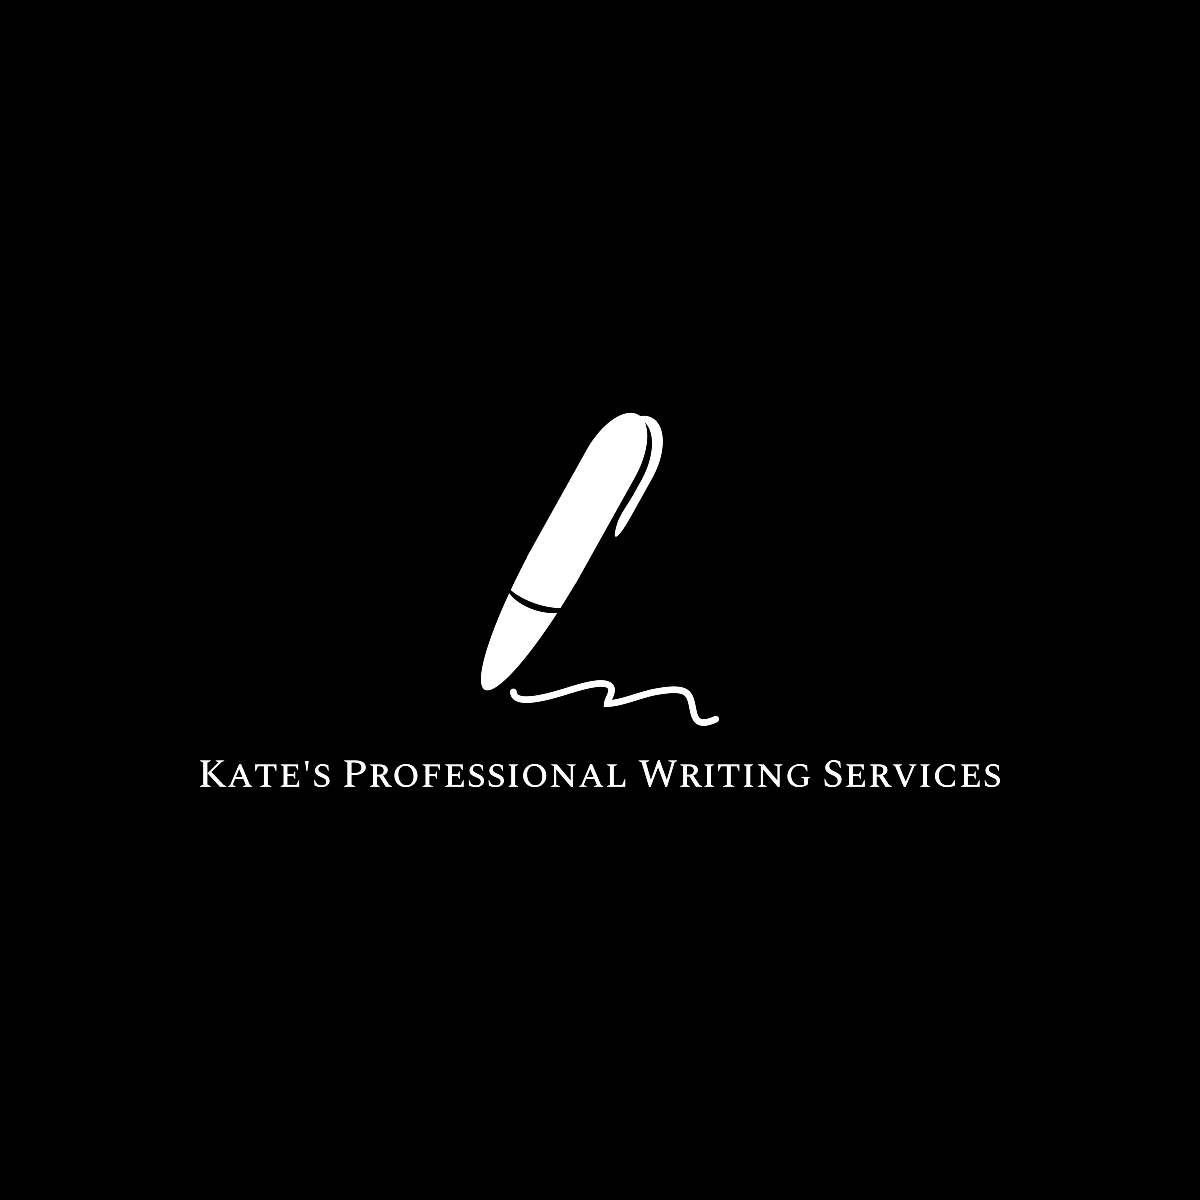 Kate's Professional Writing Services